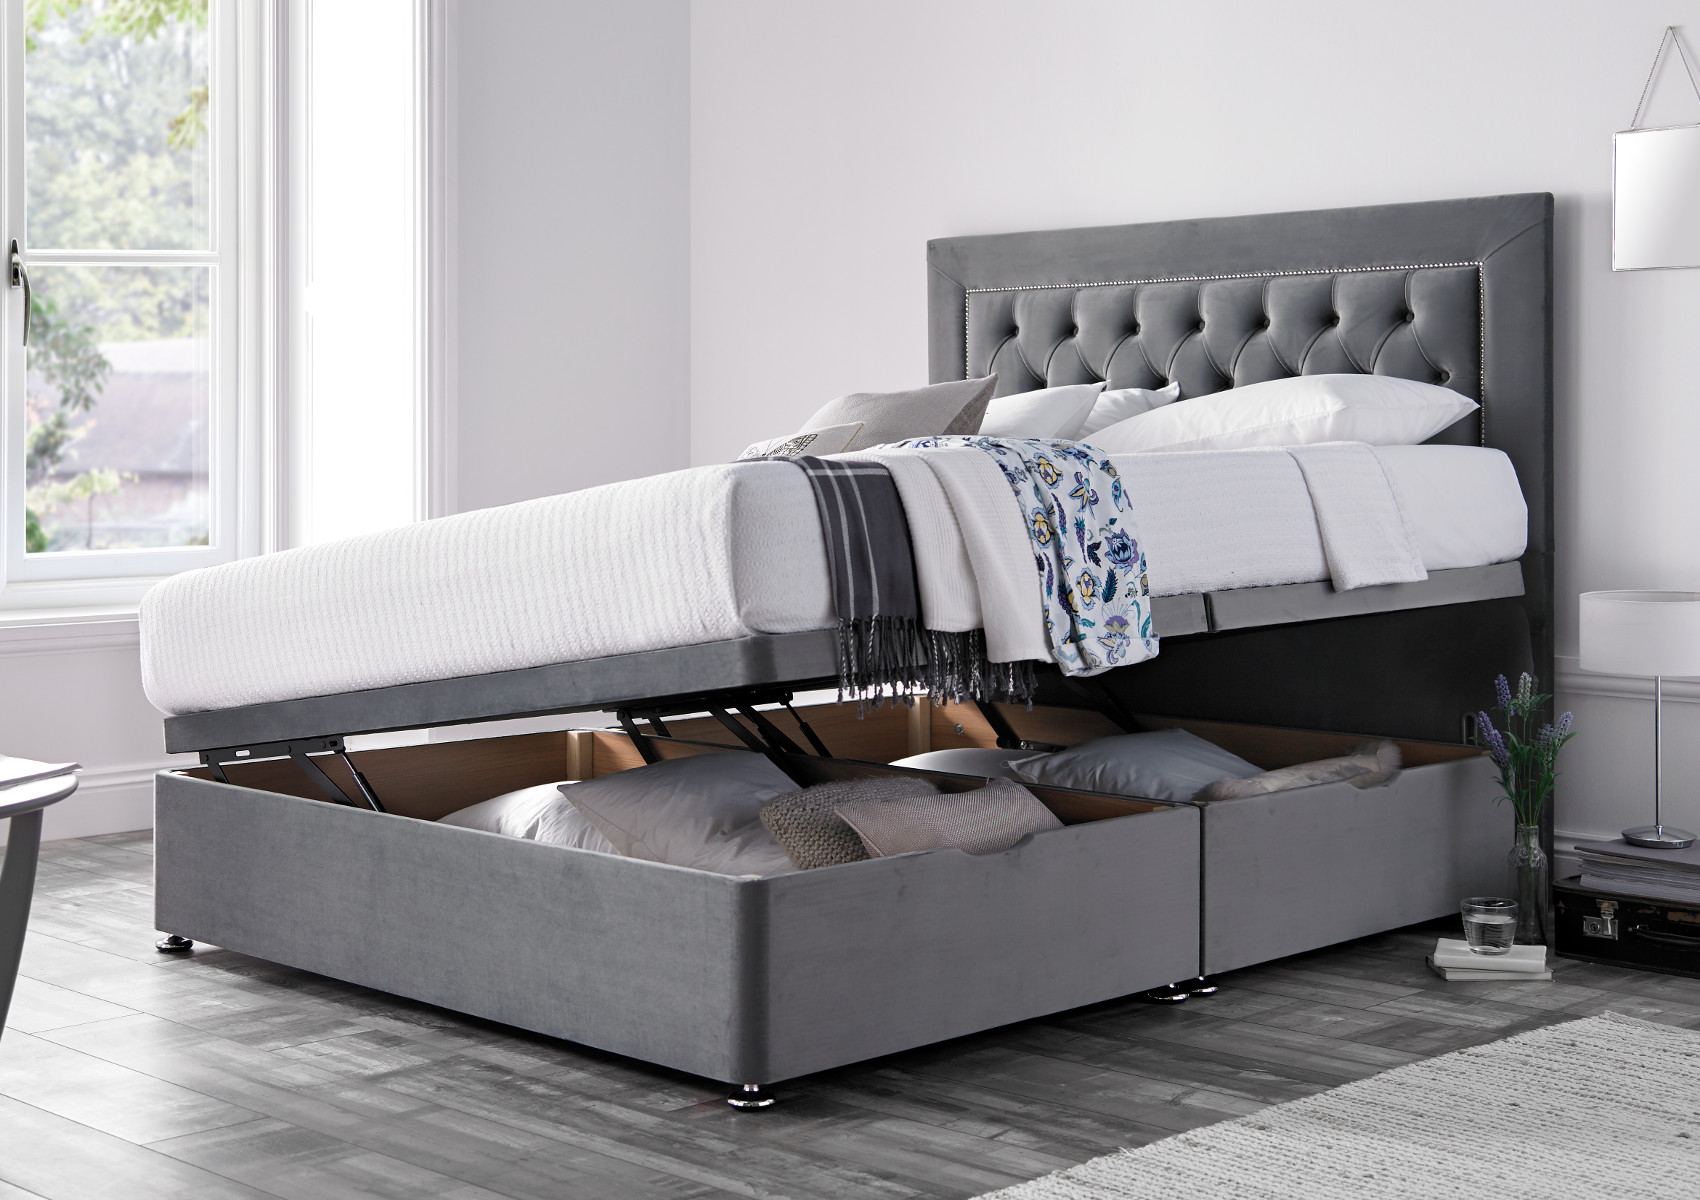 View Woodstock Naples Silver Upholstered King Size Ottoman Bed Time4Sleep information